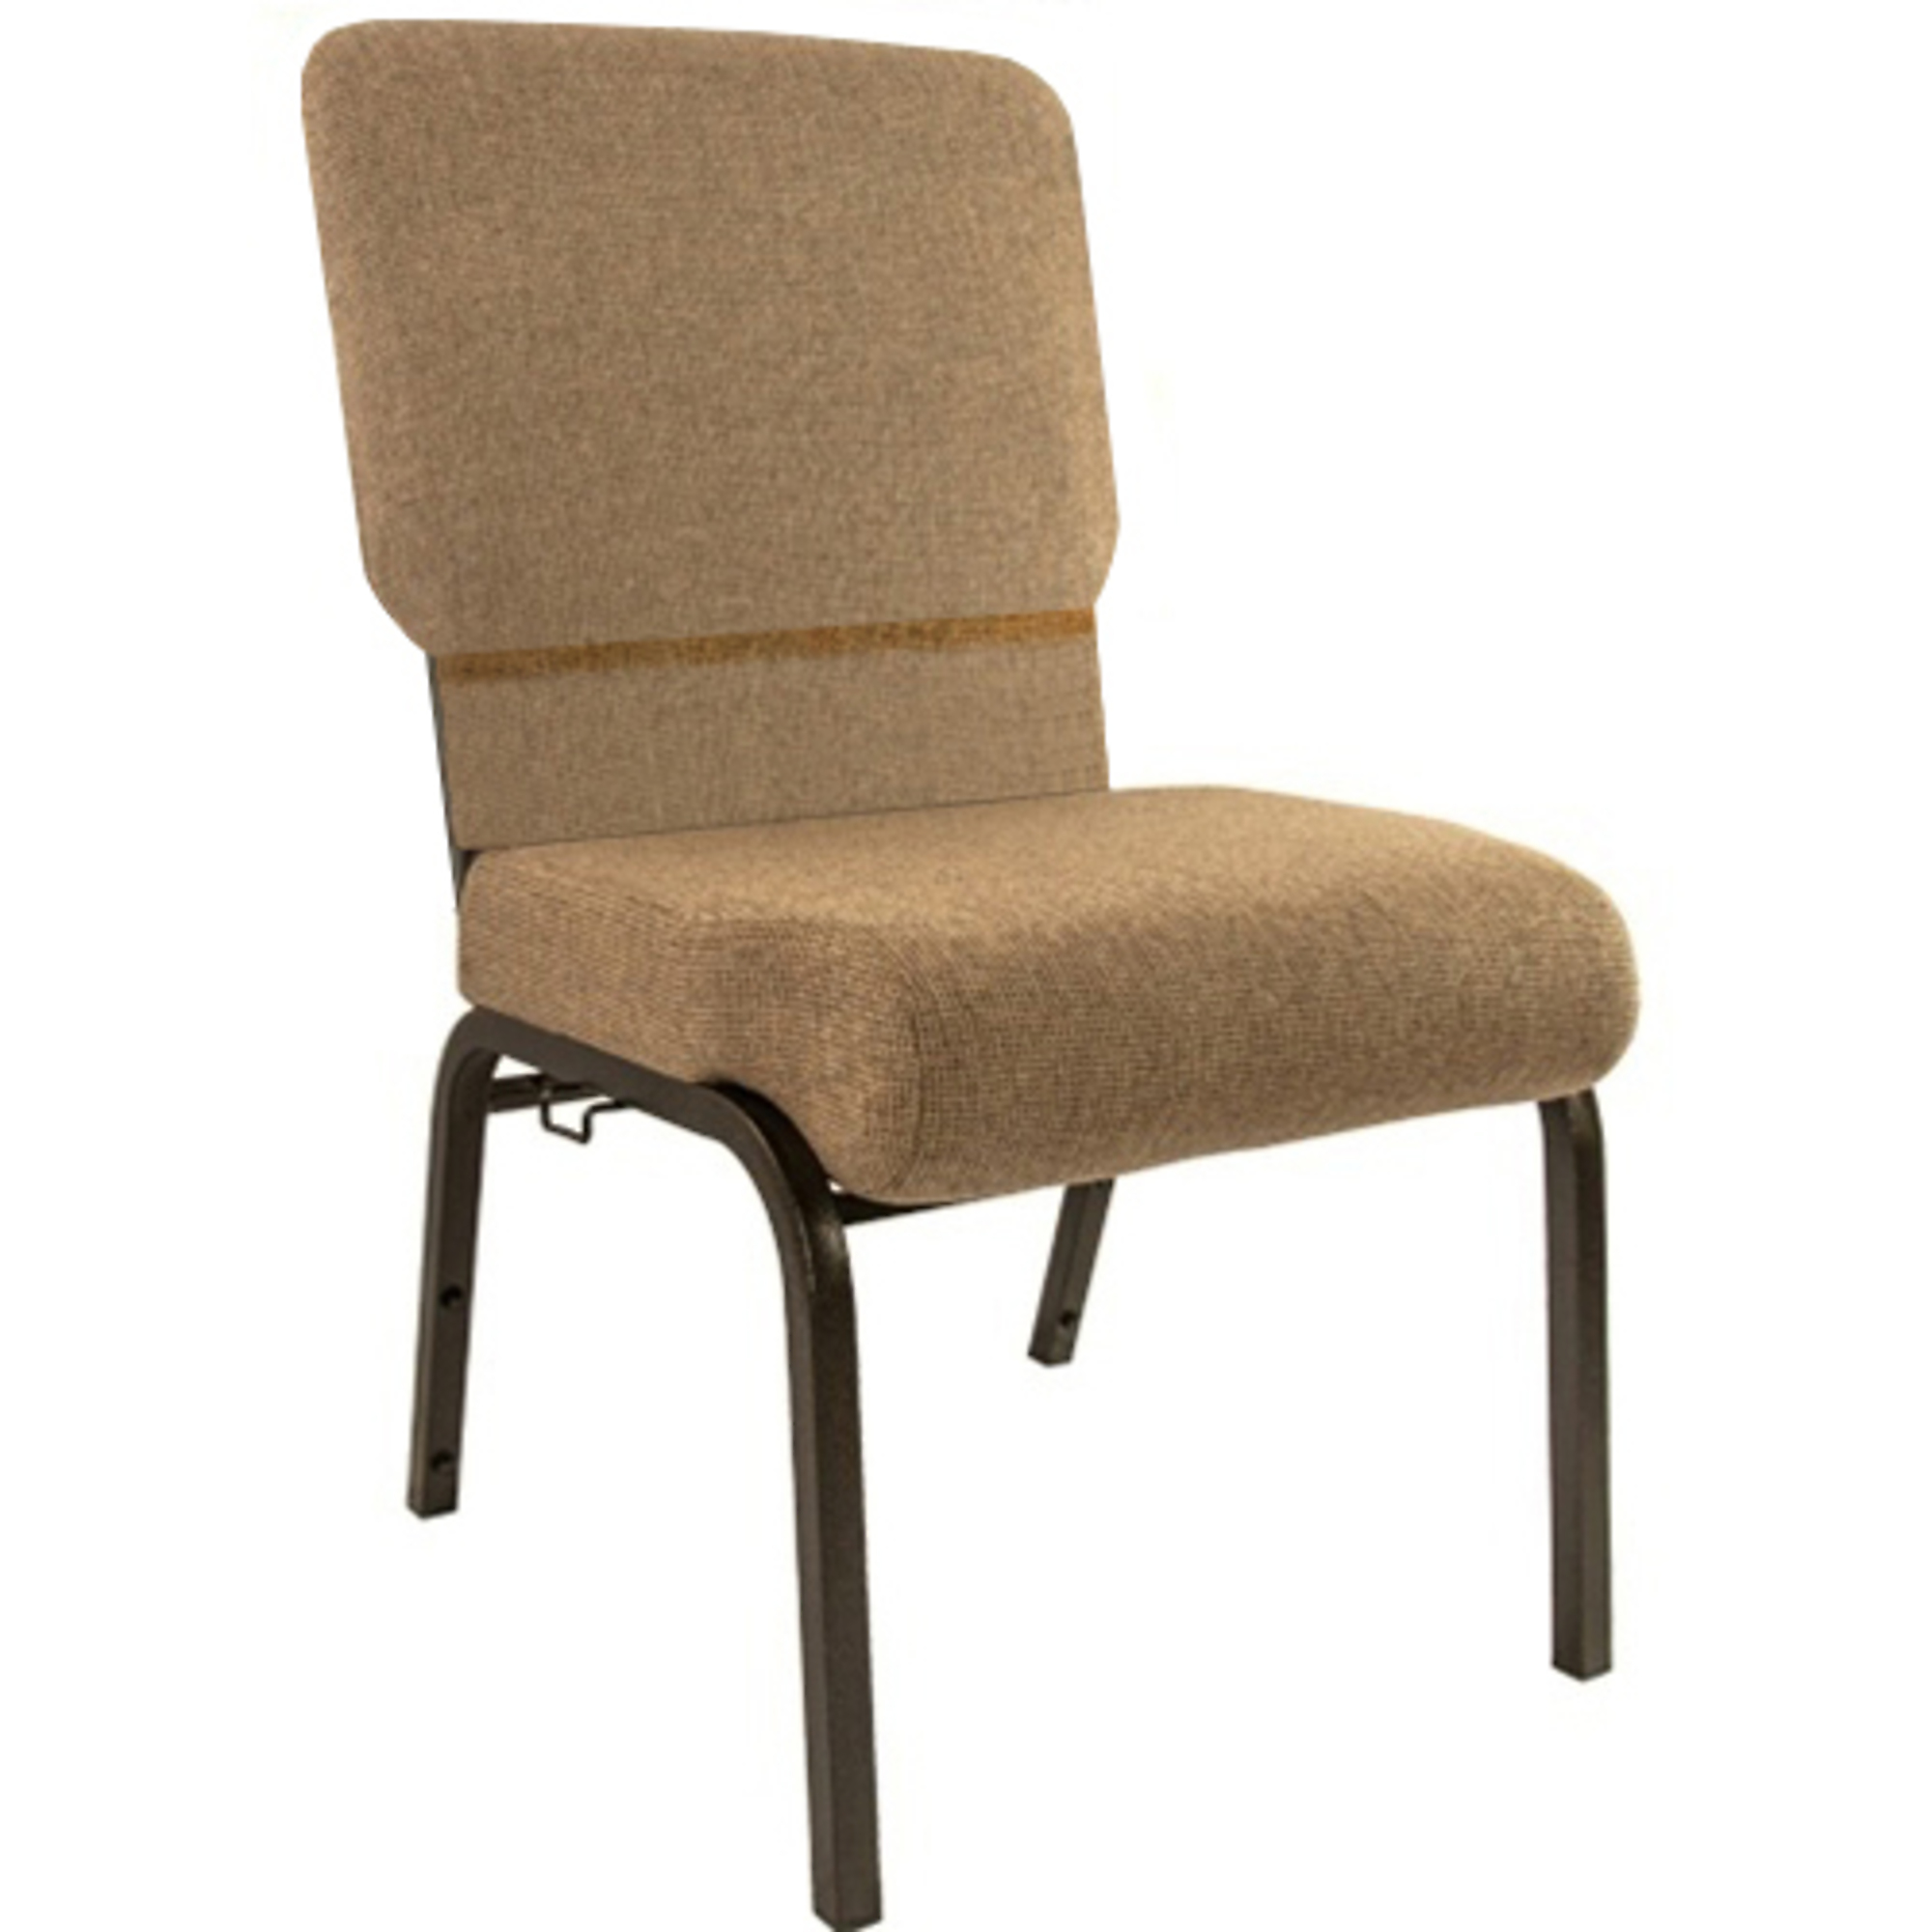 Flash Furniture, Mixed Tan Church Chair 20.5Inch Wide, Primary Color Beige, Included (qty.) 1, Model PCHT105